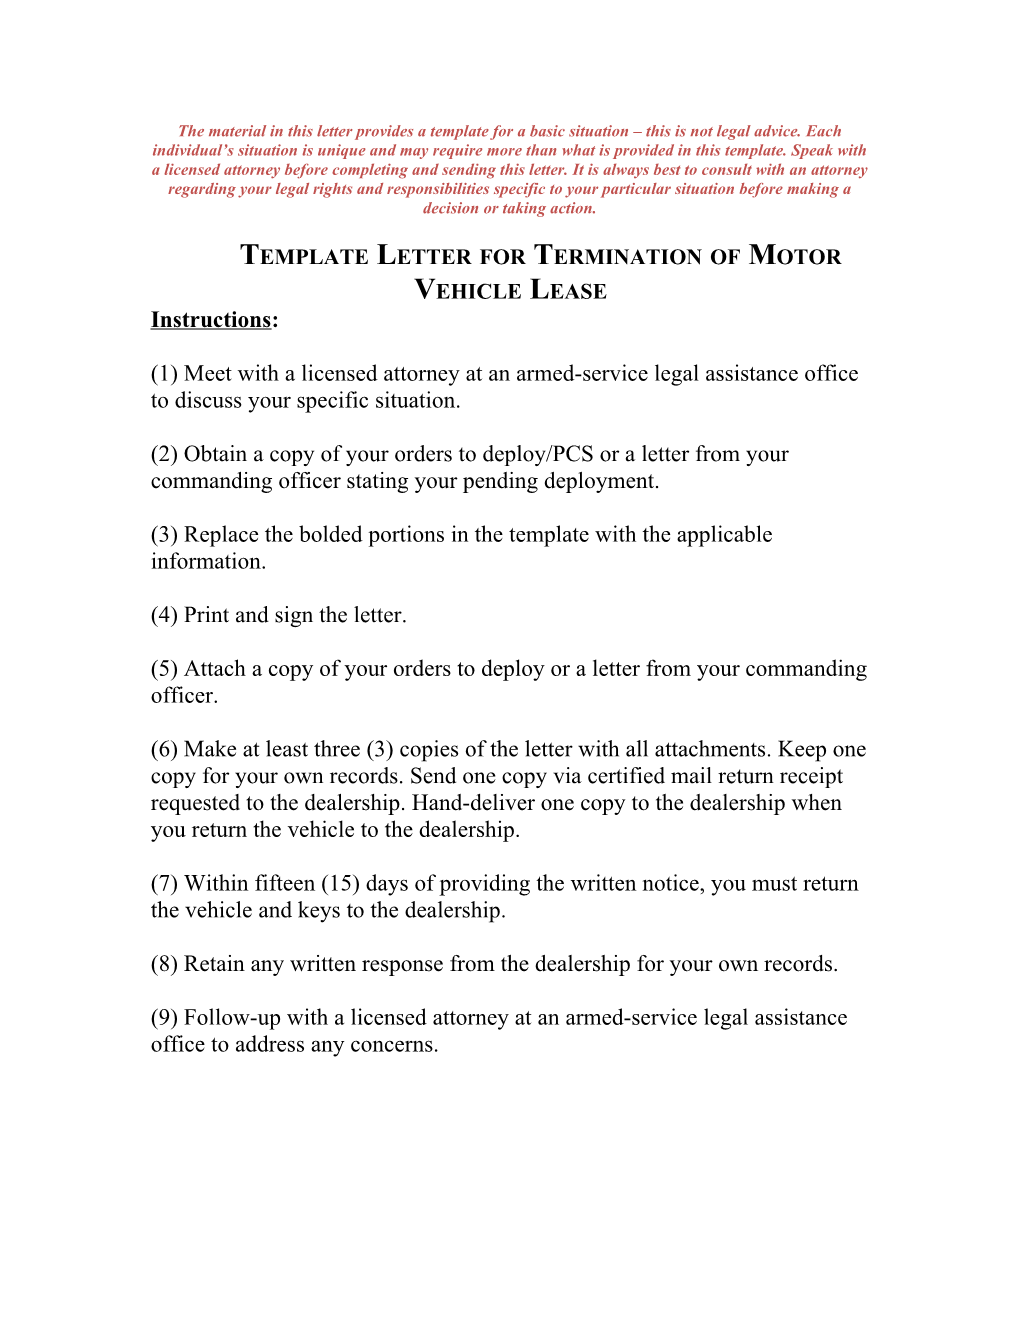 Template Letter for Termination of Motor Vehicle Lease